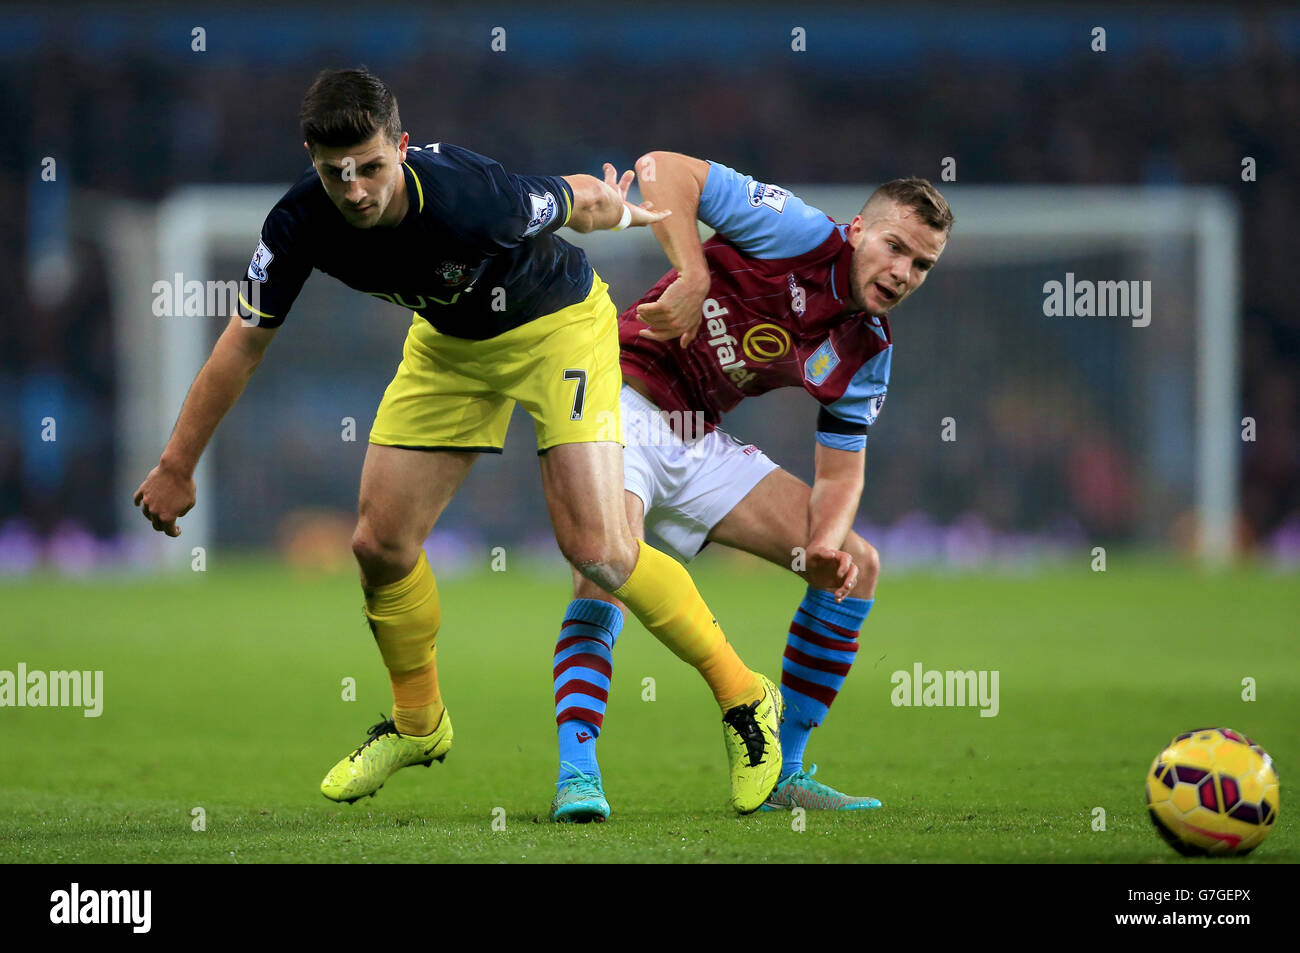 Southampton's Shane Long (left) and Aston Villa's Tom Cleverley battle for the ball during the Barclays Premier League match at Villa Park, Birmingham. PRESS ASSOCIATION Photo. Picture date: Monday November 24, 2014. See PA story SOCCER Villa. Photo credit should read Nick Potts/PA Wire. Maximum 45 images during a match. No video emulation or promotion as 'live'. No use in games, competitions, merchandise, betting or single club/player services. No use with unofficial audio, video, data, fixtures or club/league logos. Stock Photo